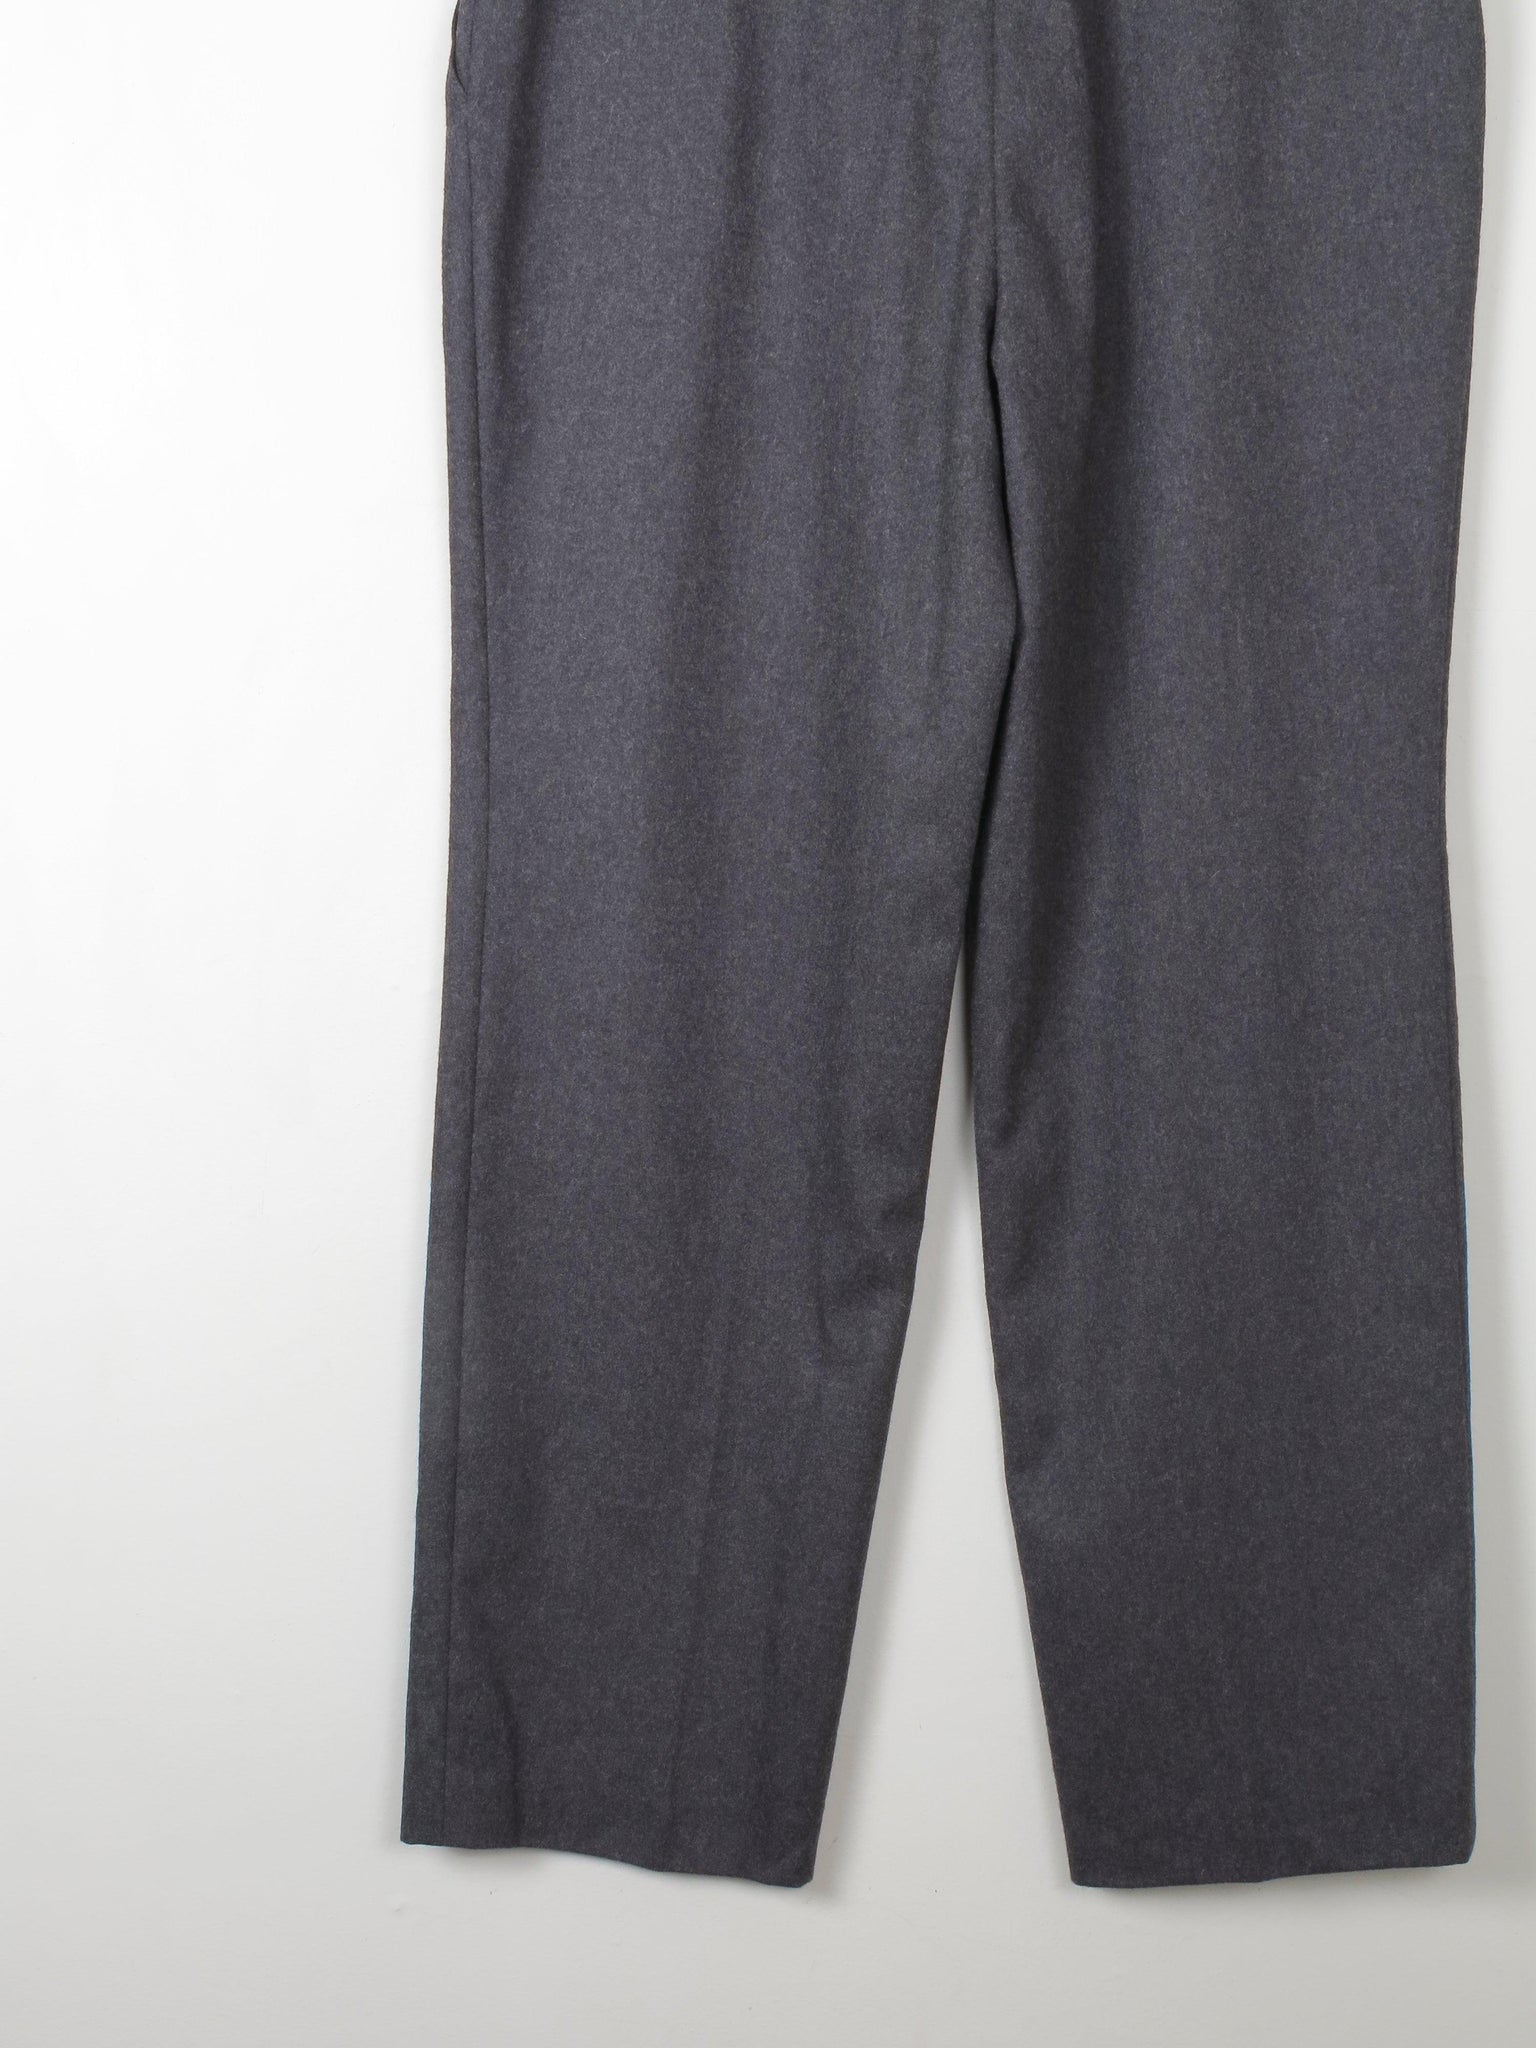 Women's Vintage Grey Wool Trousers L 33"/31L - The Harlequin